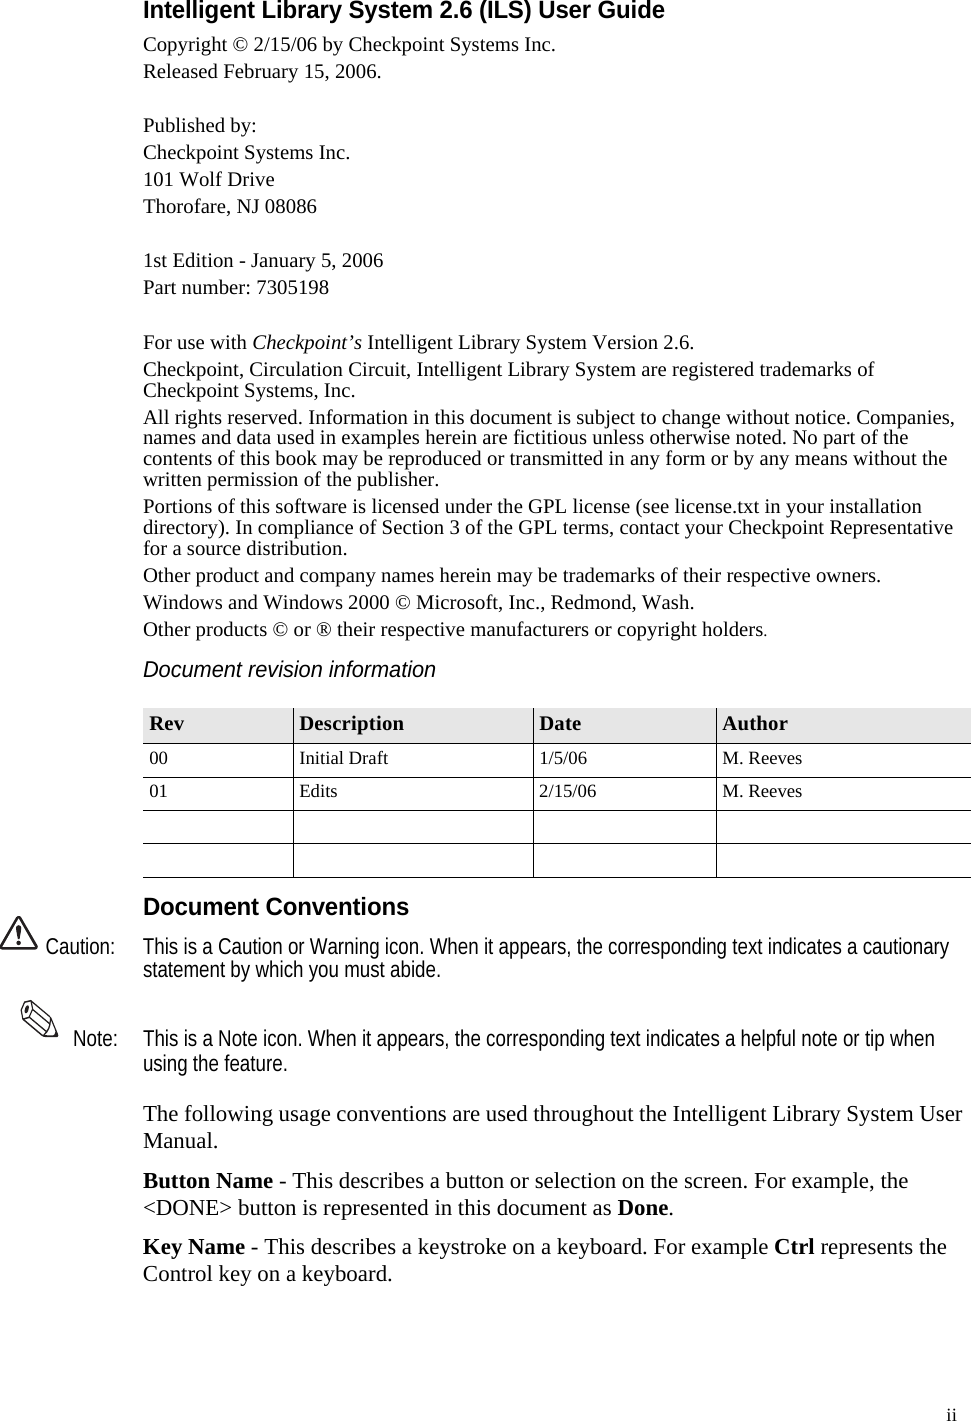   ii Intelligent Library System 2.6 (ILS) User GuideCopyright © 2/15/06 by Checkpoint Systems Inc.Released February 15, 2006.Published by:Checkpoint Systems Inc.101 Wolf DriveThorofare, NJ 080861st Edition - January 5, 2006Part number: 7305198For use with Checkpoint’s Intelligent Library System Version 2.6.Checkpoint, Circulation Circuit, Intelligent Library System are registered trademarks of Checkpoint Systems, Inc.All rights reserved. Information in this document is subject to change without notice. Companies, names and data used in examples herein are fictitious unless otherwise noted. No part of the contents of this book may be reproduced or transmitted in any form or by any means without the written permission of the publisher.Portions of this software is licensed under the GPL license (see license.txt in your installation directory). In compliance of Section 3 of the GPL terms, contact your Checkpoint Representative for a source distribution. Other product and company names herein may be trademarks of their respective owners.Windows and Windows 2000 © Microsoft, Inc., Redmond, Wash.Other products © or ® their respective manufacturers or copyright holders.Document revision informationDocument ConventionsCaution: This is a Caution or Warning icon. When it appears, the corresponding text indicates a cautionary statement by which you must abide. Note: This is a Note icon. When it appears, the corresponding text indicates a helpful note or tip when using the feature.The following usage conventions are used throughout the Intelligent Library System User Manual.Button Name - This describes a button or selection on the screen. For example, the &lt;DONE&gt; button is represented in this document as Done.Key Name - This describes a keystroke on a keyboard. For example Ctrl represents the Control key on a keyboard.Rev Description Date Author00 Initial Draft 1/5/06 M. Reeves01 Edits 2/15/06 M. Reeves